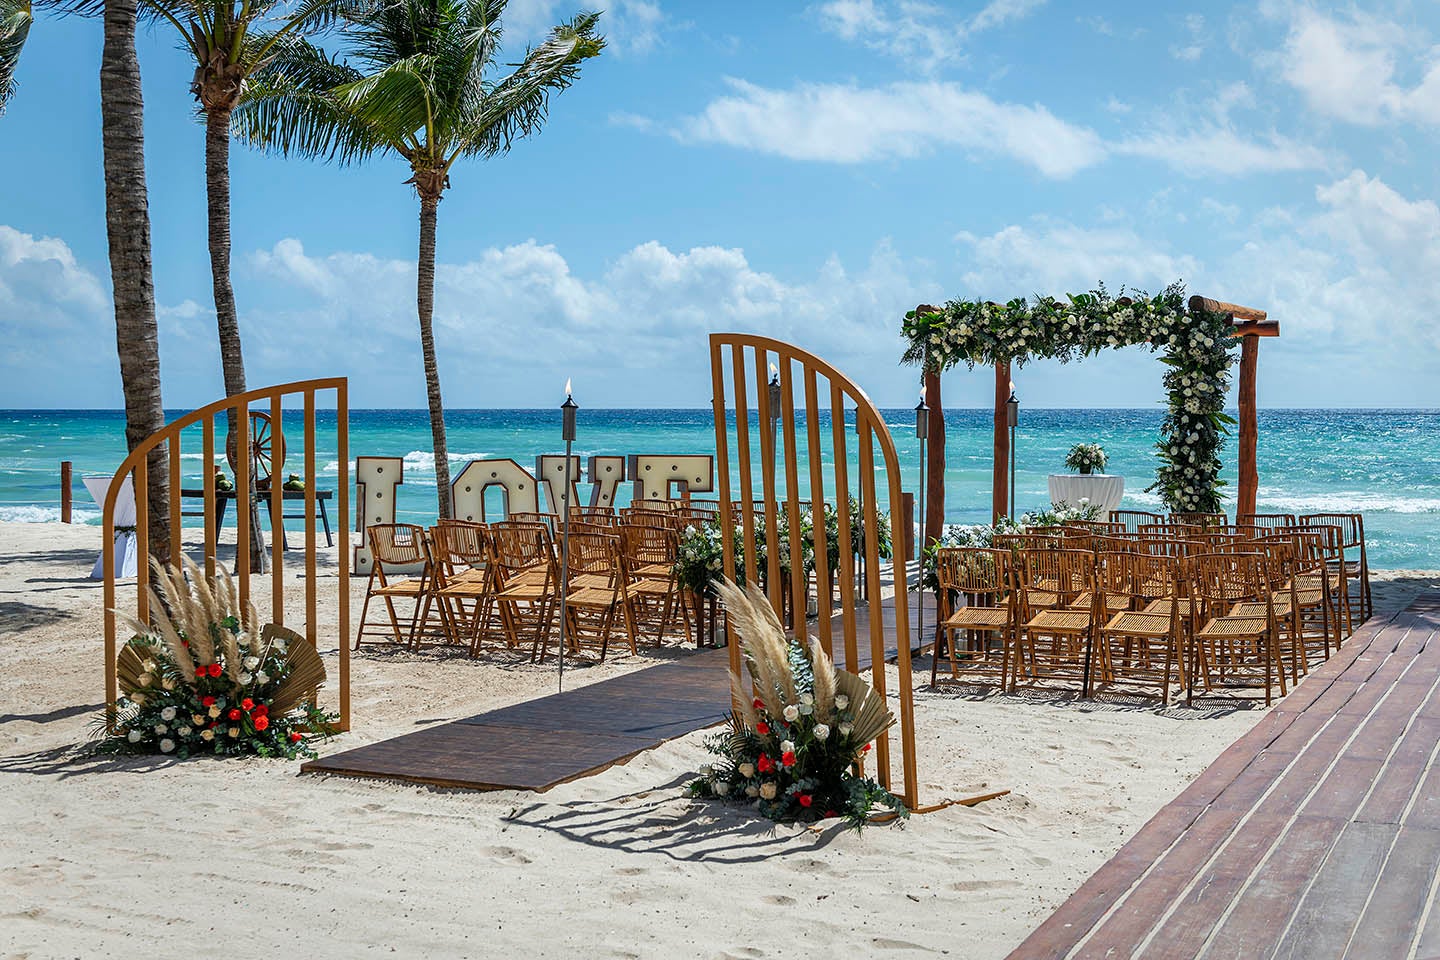 Perfect Day Special Wedding Set-Up